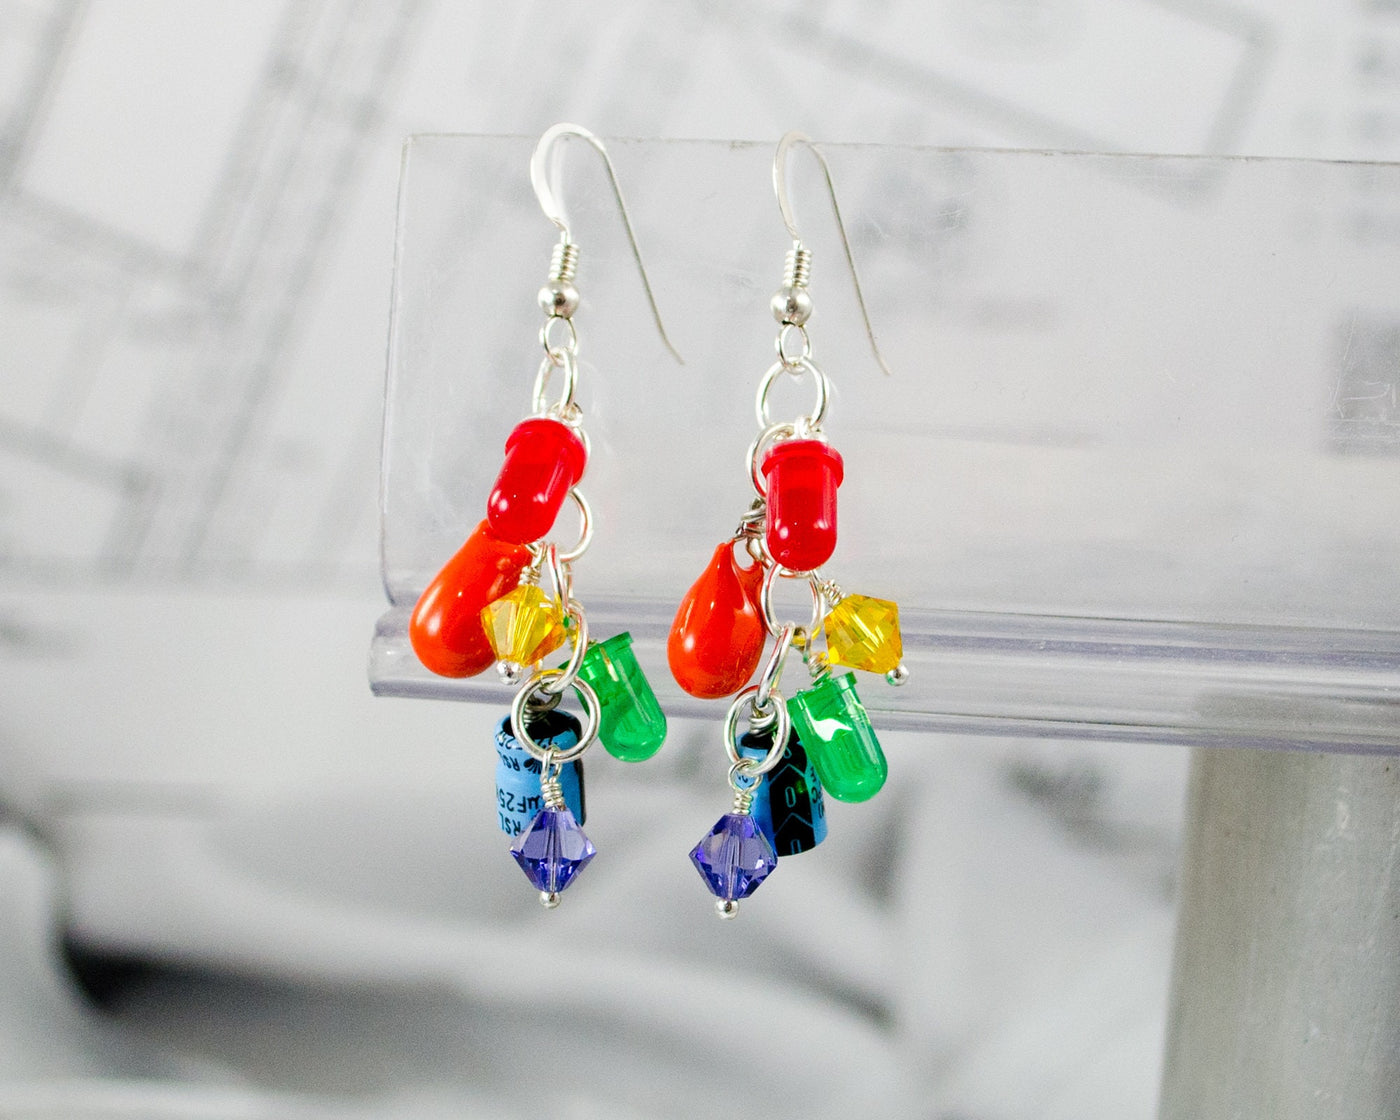 Rainbow Electronic Component Cluster Earrings, Sterling Silver Earrings, Pride Funky Earrings, Colorful Upcycled Electronics Earrings